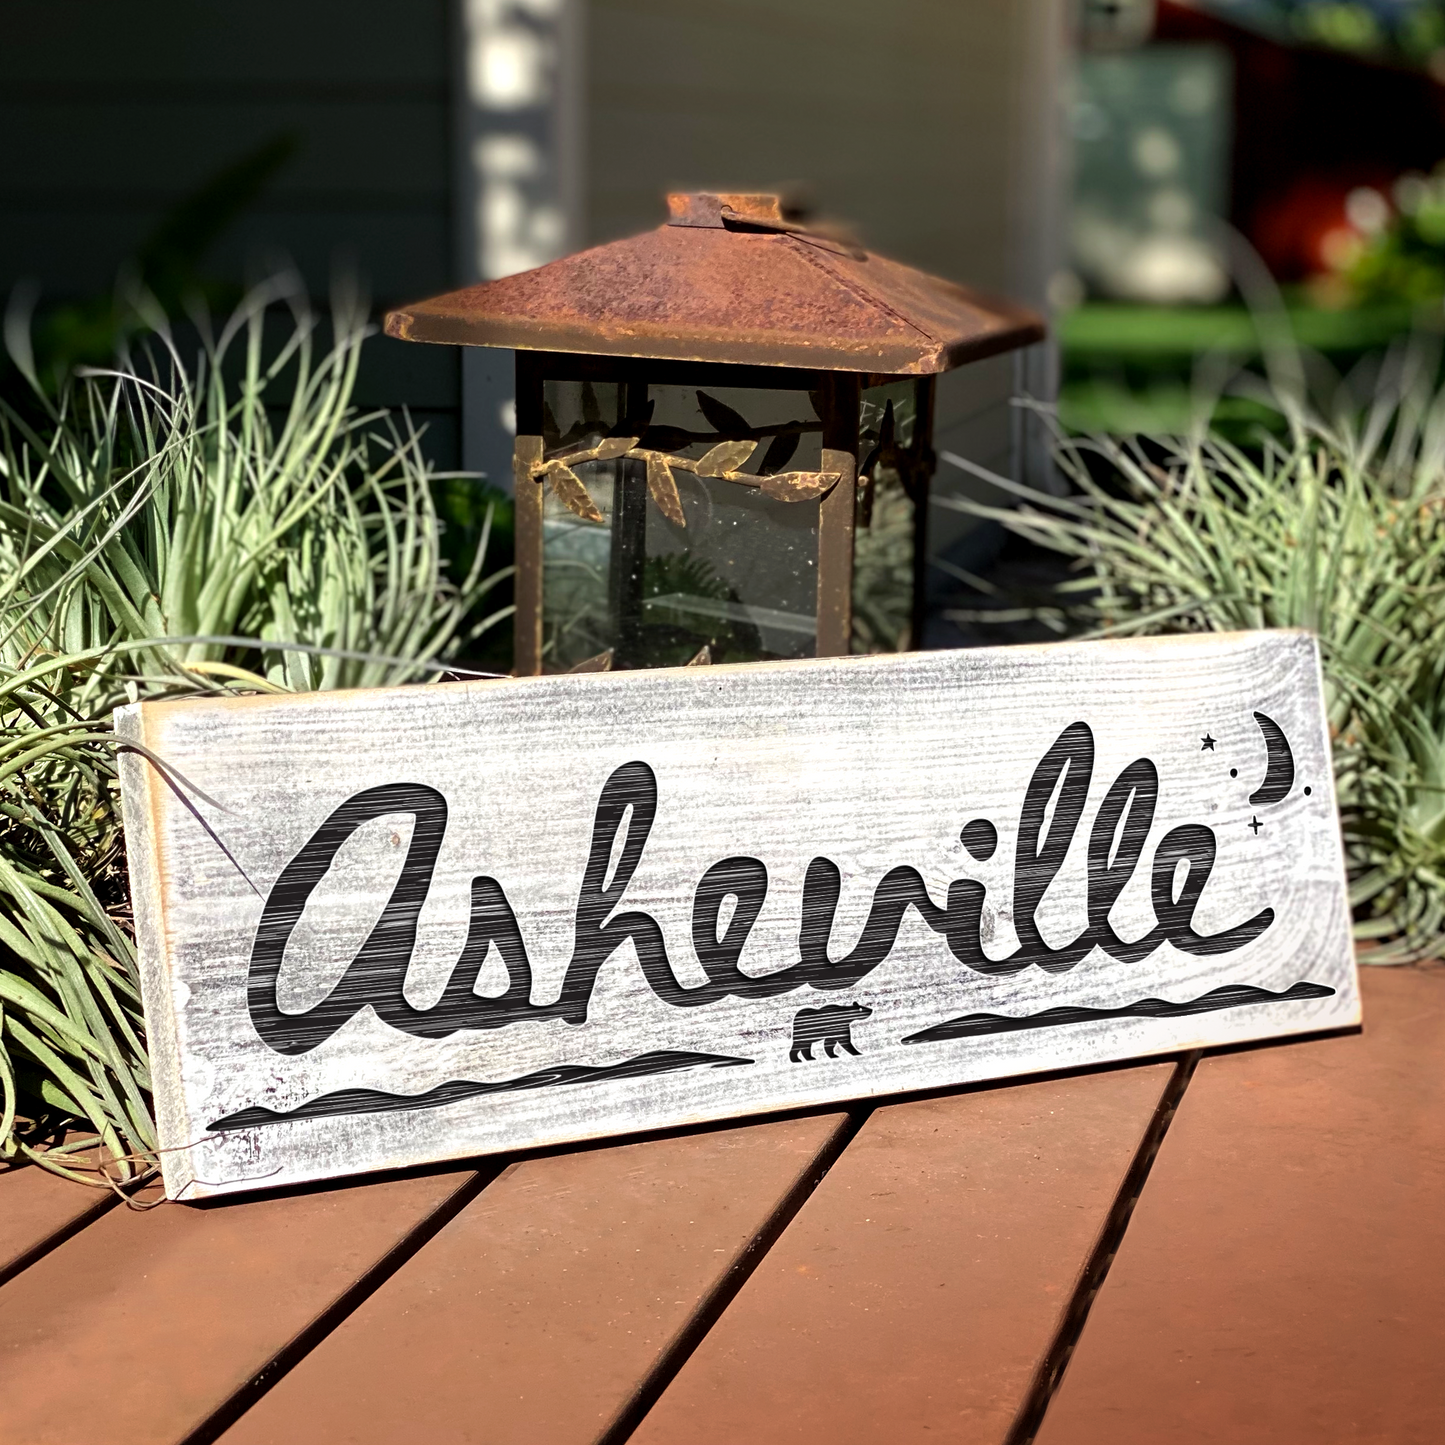 Asheville NC - Handcrafted Artisan Wood Sign